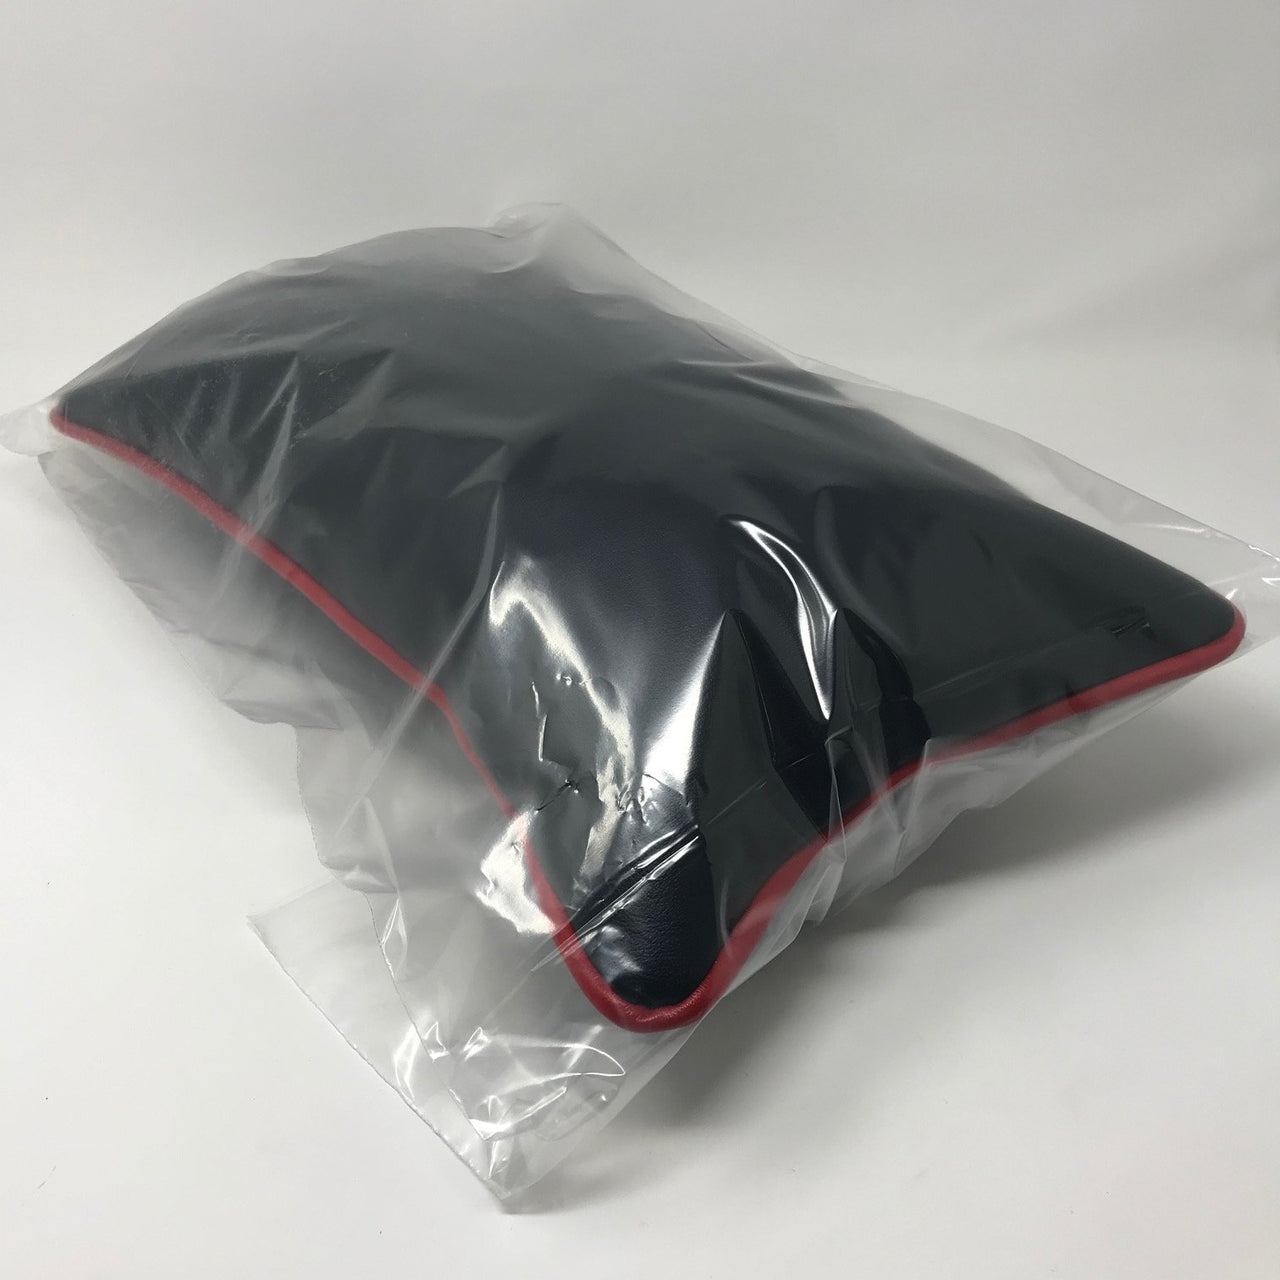 Available at True Tattoo Supply. Tattoo Pillow Covers are disposable and prefect to keep your Jewel Tattoo Pillow clean and easy to use with a brand new pillow cover for each client! These covers are sized to fit the Jewel Mini, Jewel OG, XL Jewel, & Square Jewel.   2mm thick  Disposable  Bags of 20 Clear Plastic